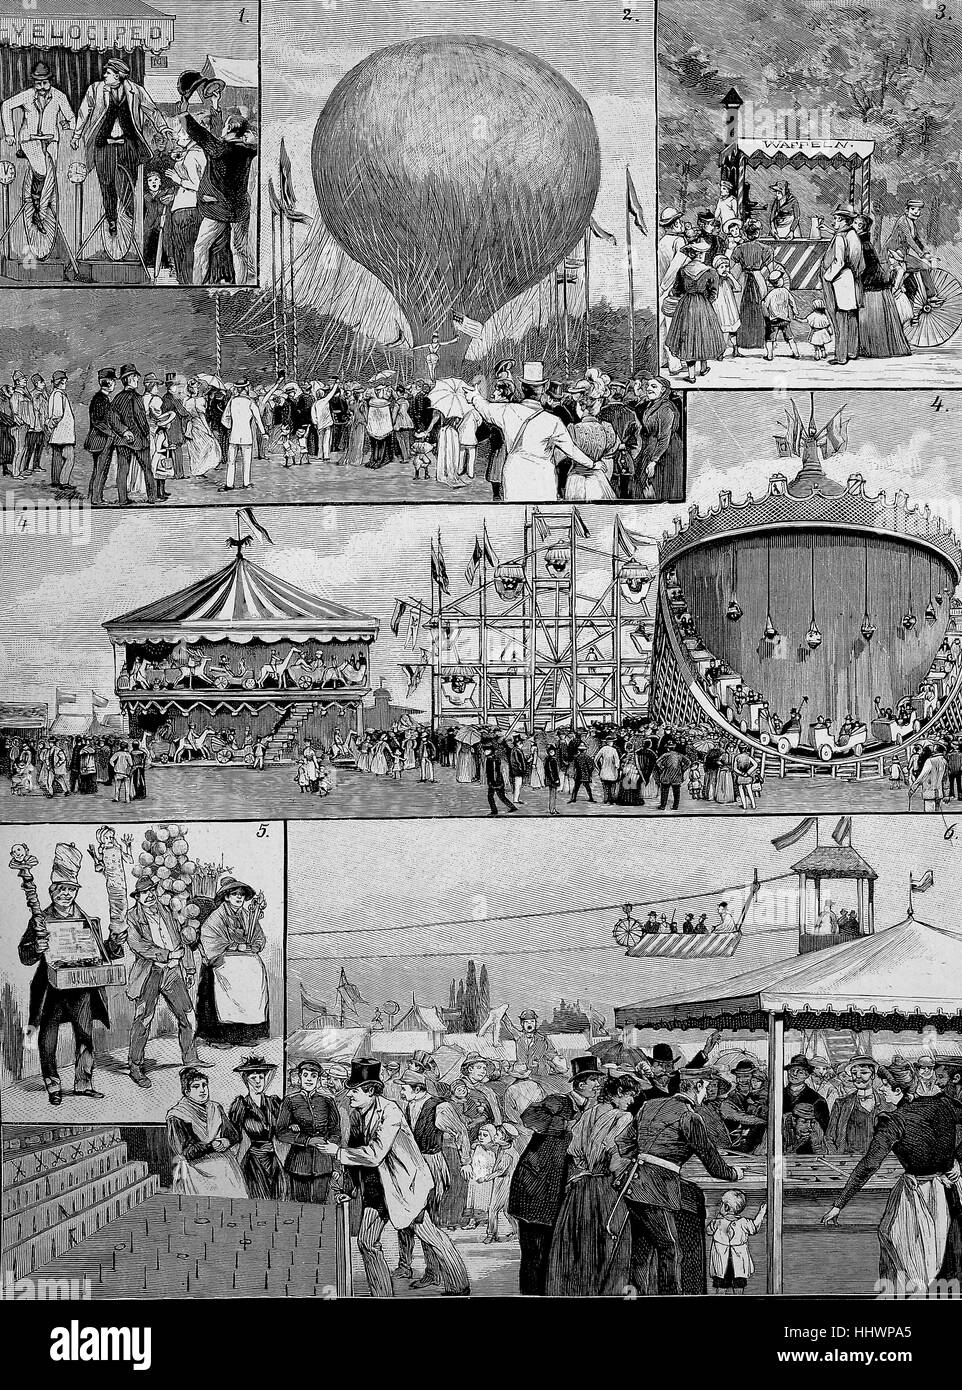 Pictures from the Hasenheide amusement park in Berlin, original drawing by G. Lulvas, Germany, historical image or illustration, published 1890, digital improved Stock Photo